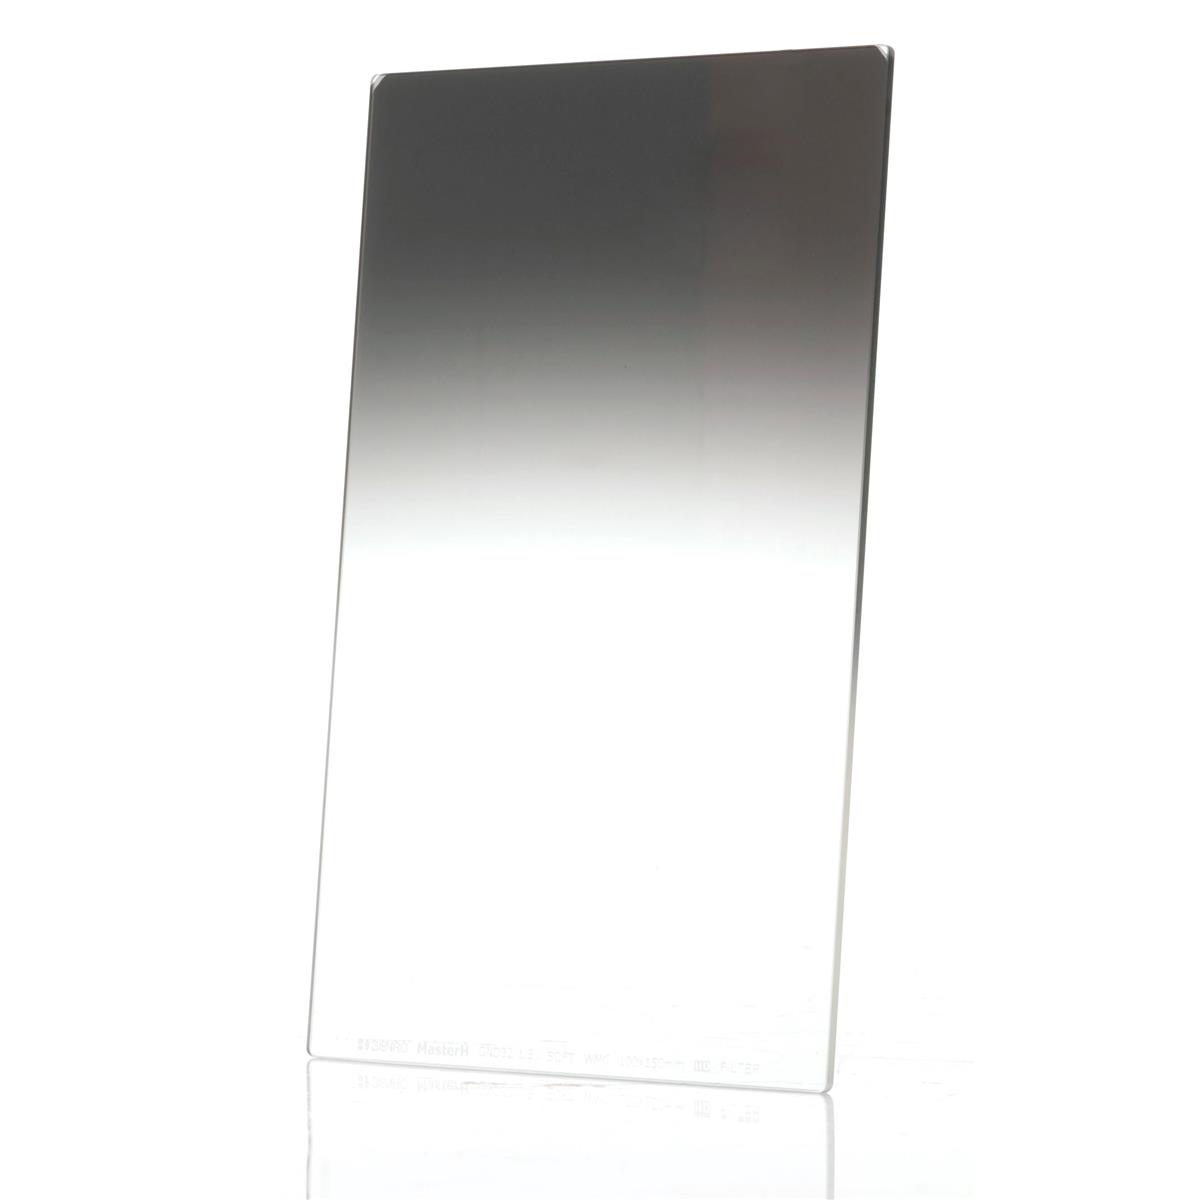 Image of Benro 100x150mm Master Hardened Glass Soft Graduated 1.5 ND Filter